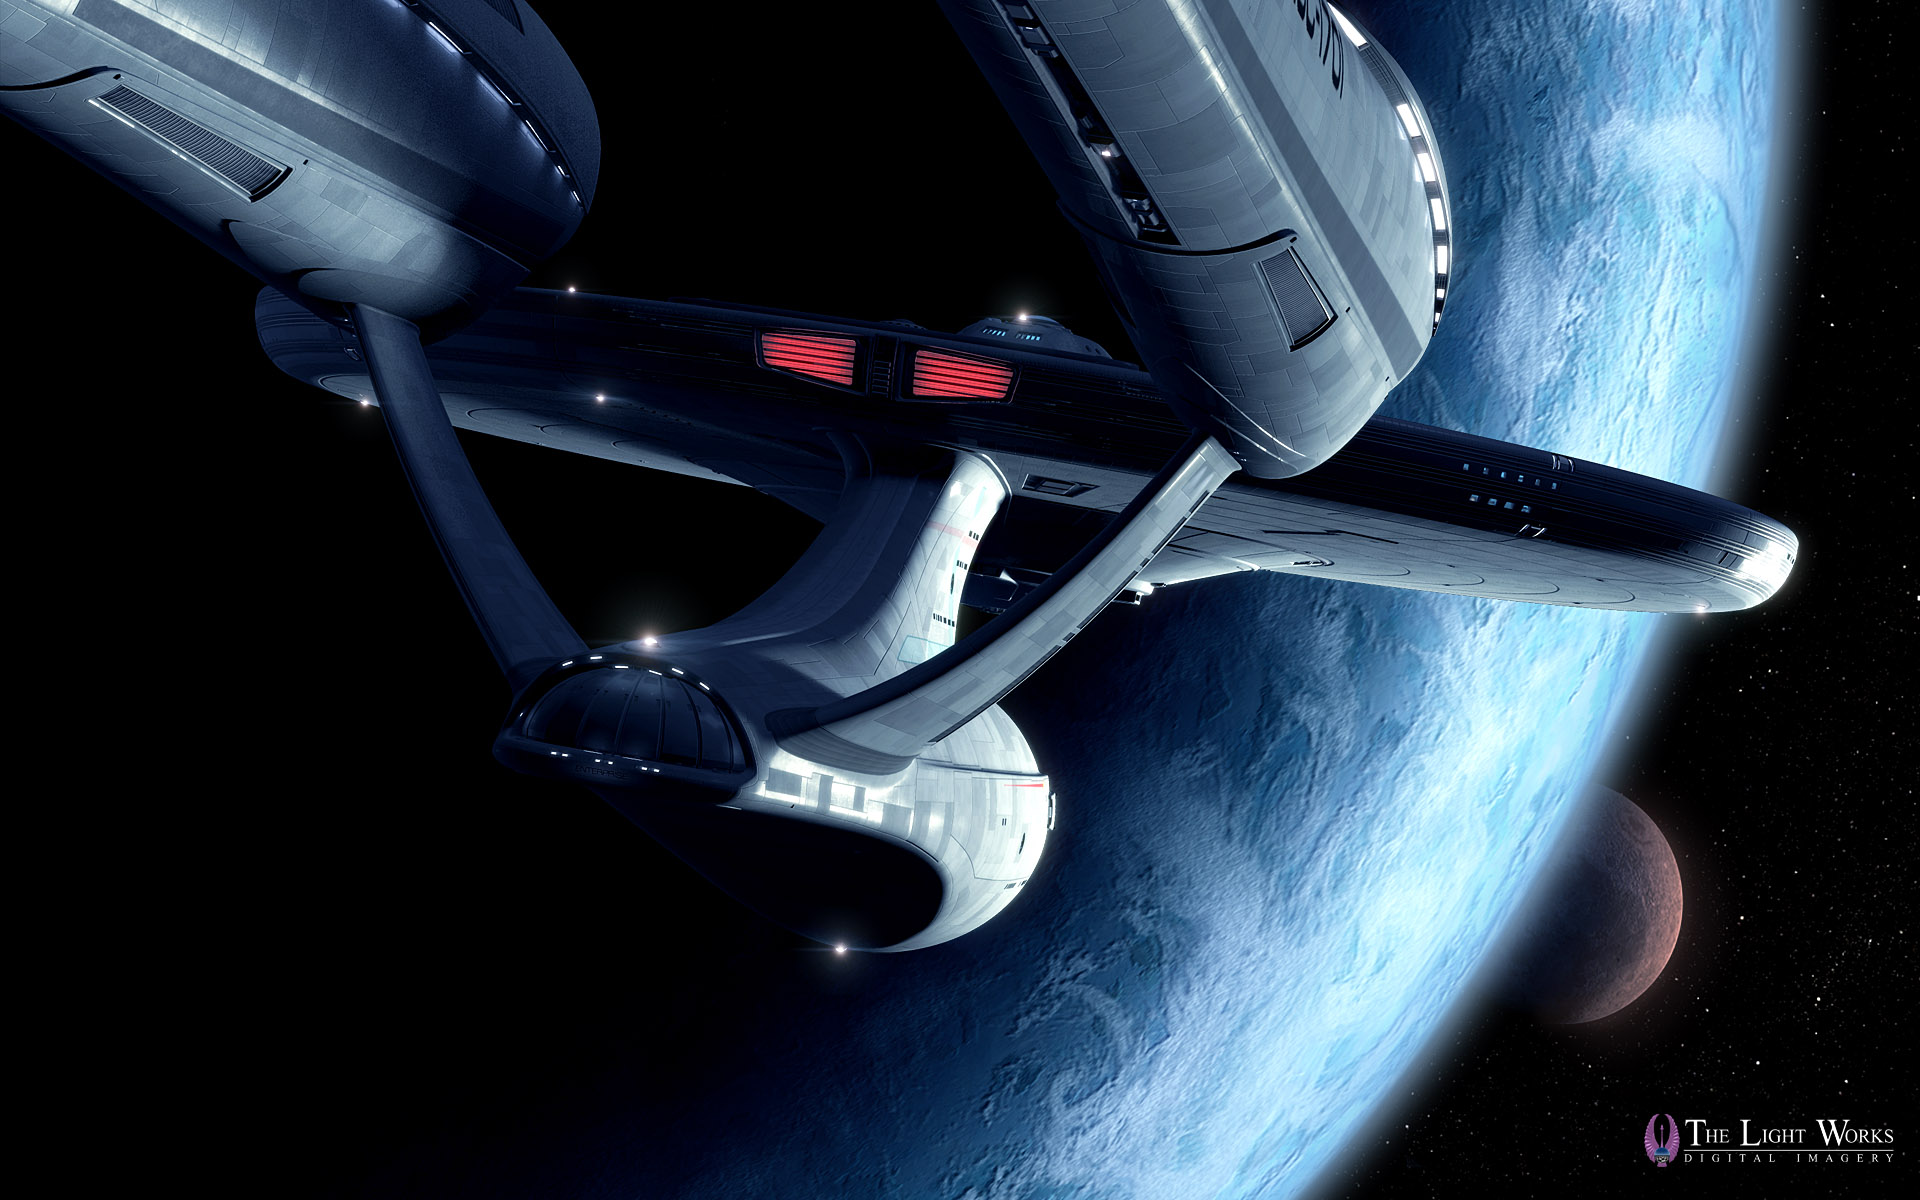  .com/2009/02/23/first-look-at-tobias-richters-uss-enterprise-wallpapers